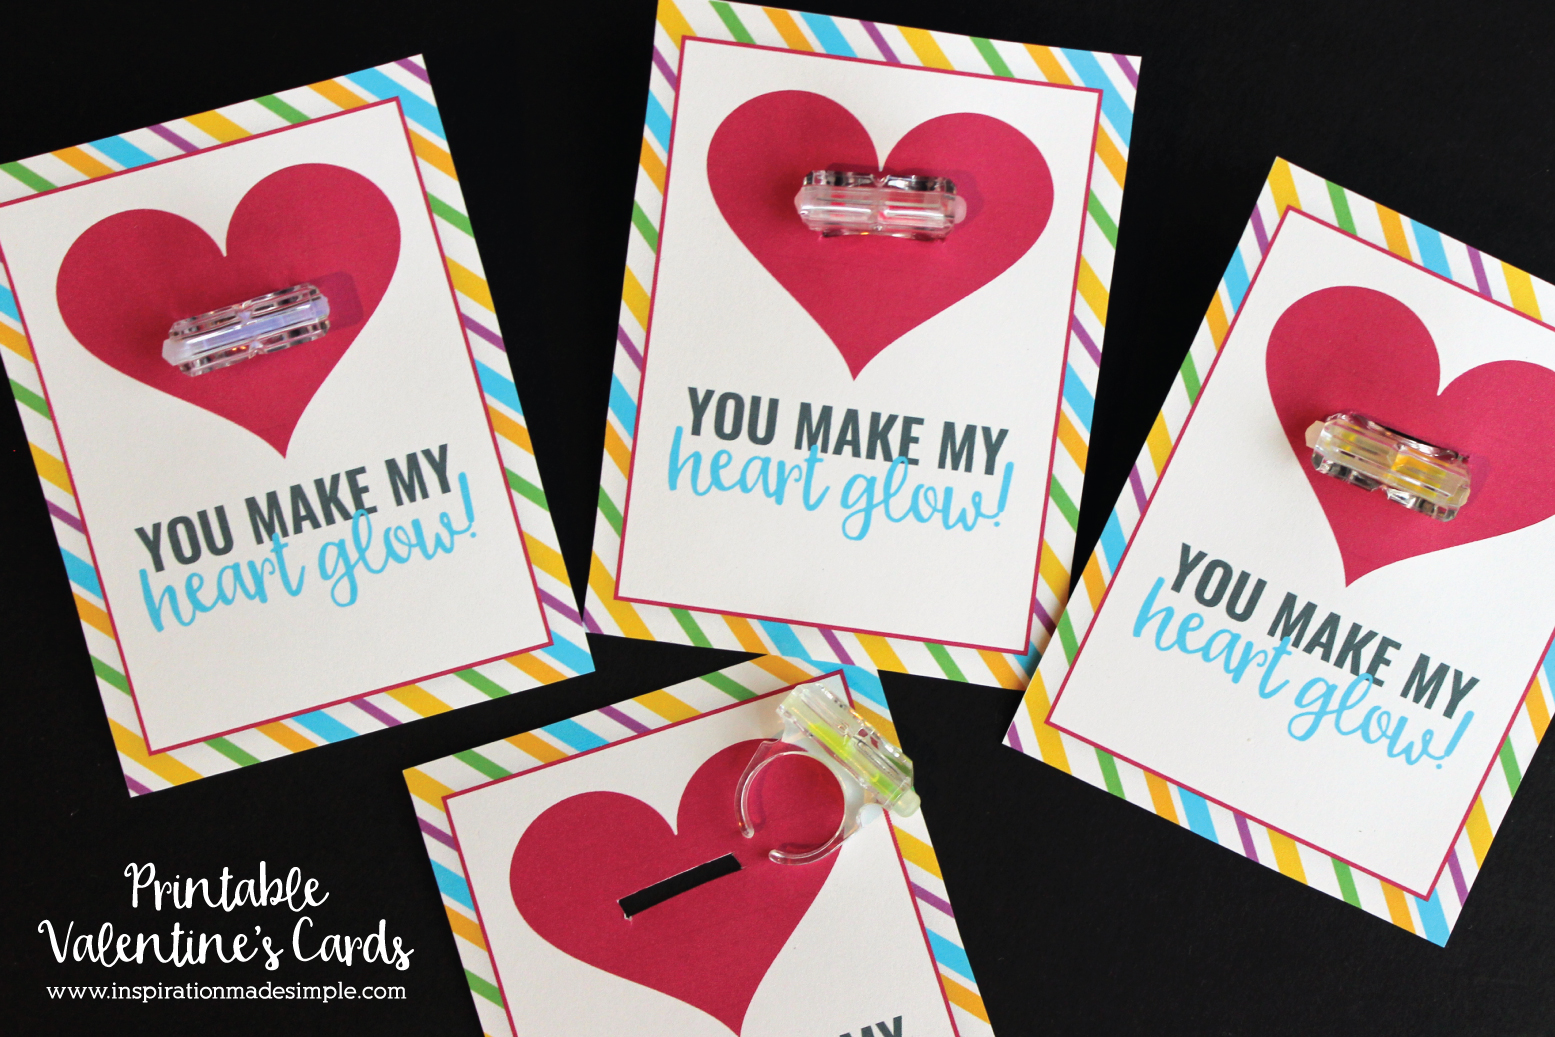 Printable "You make my heart glow" Valentine's Day Cards - paired with a glow ring, these cards are sure to be a hit!